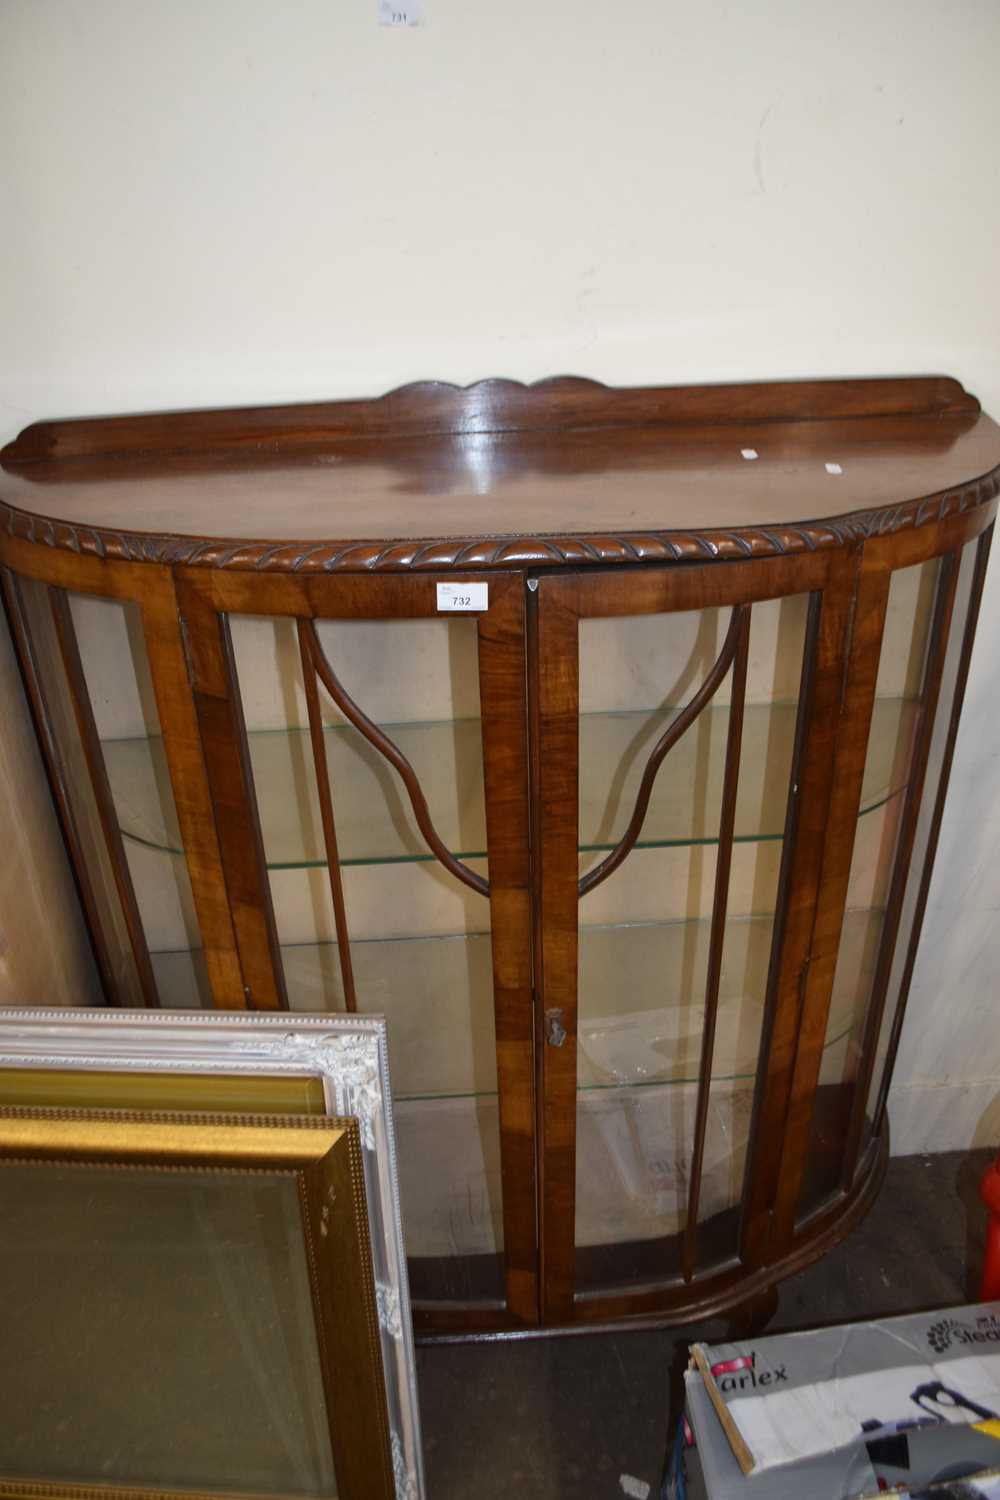 EARLY 20TH CENTURY BOW FRONT CHINA DISPLAY CABINET